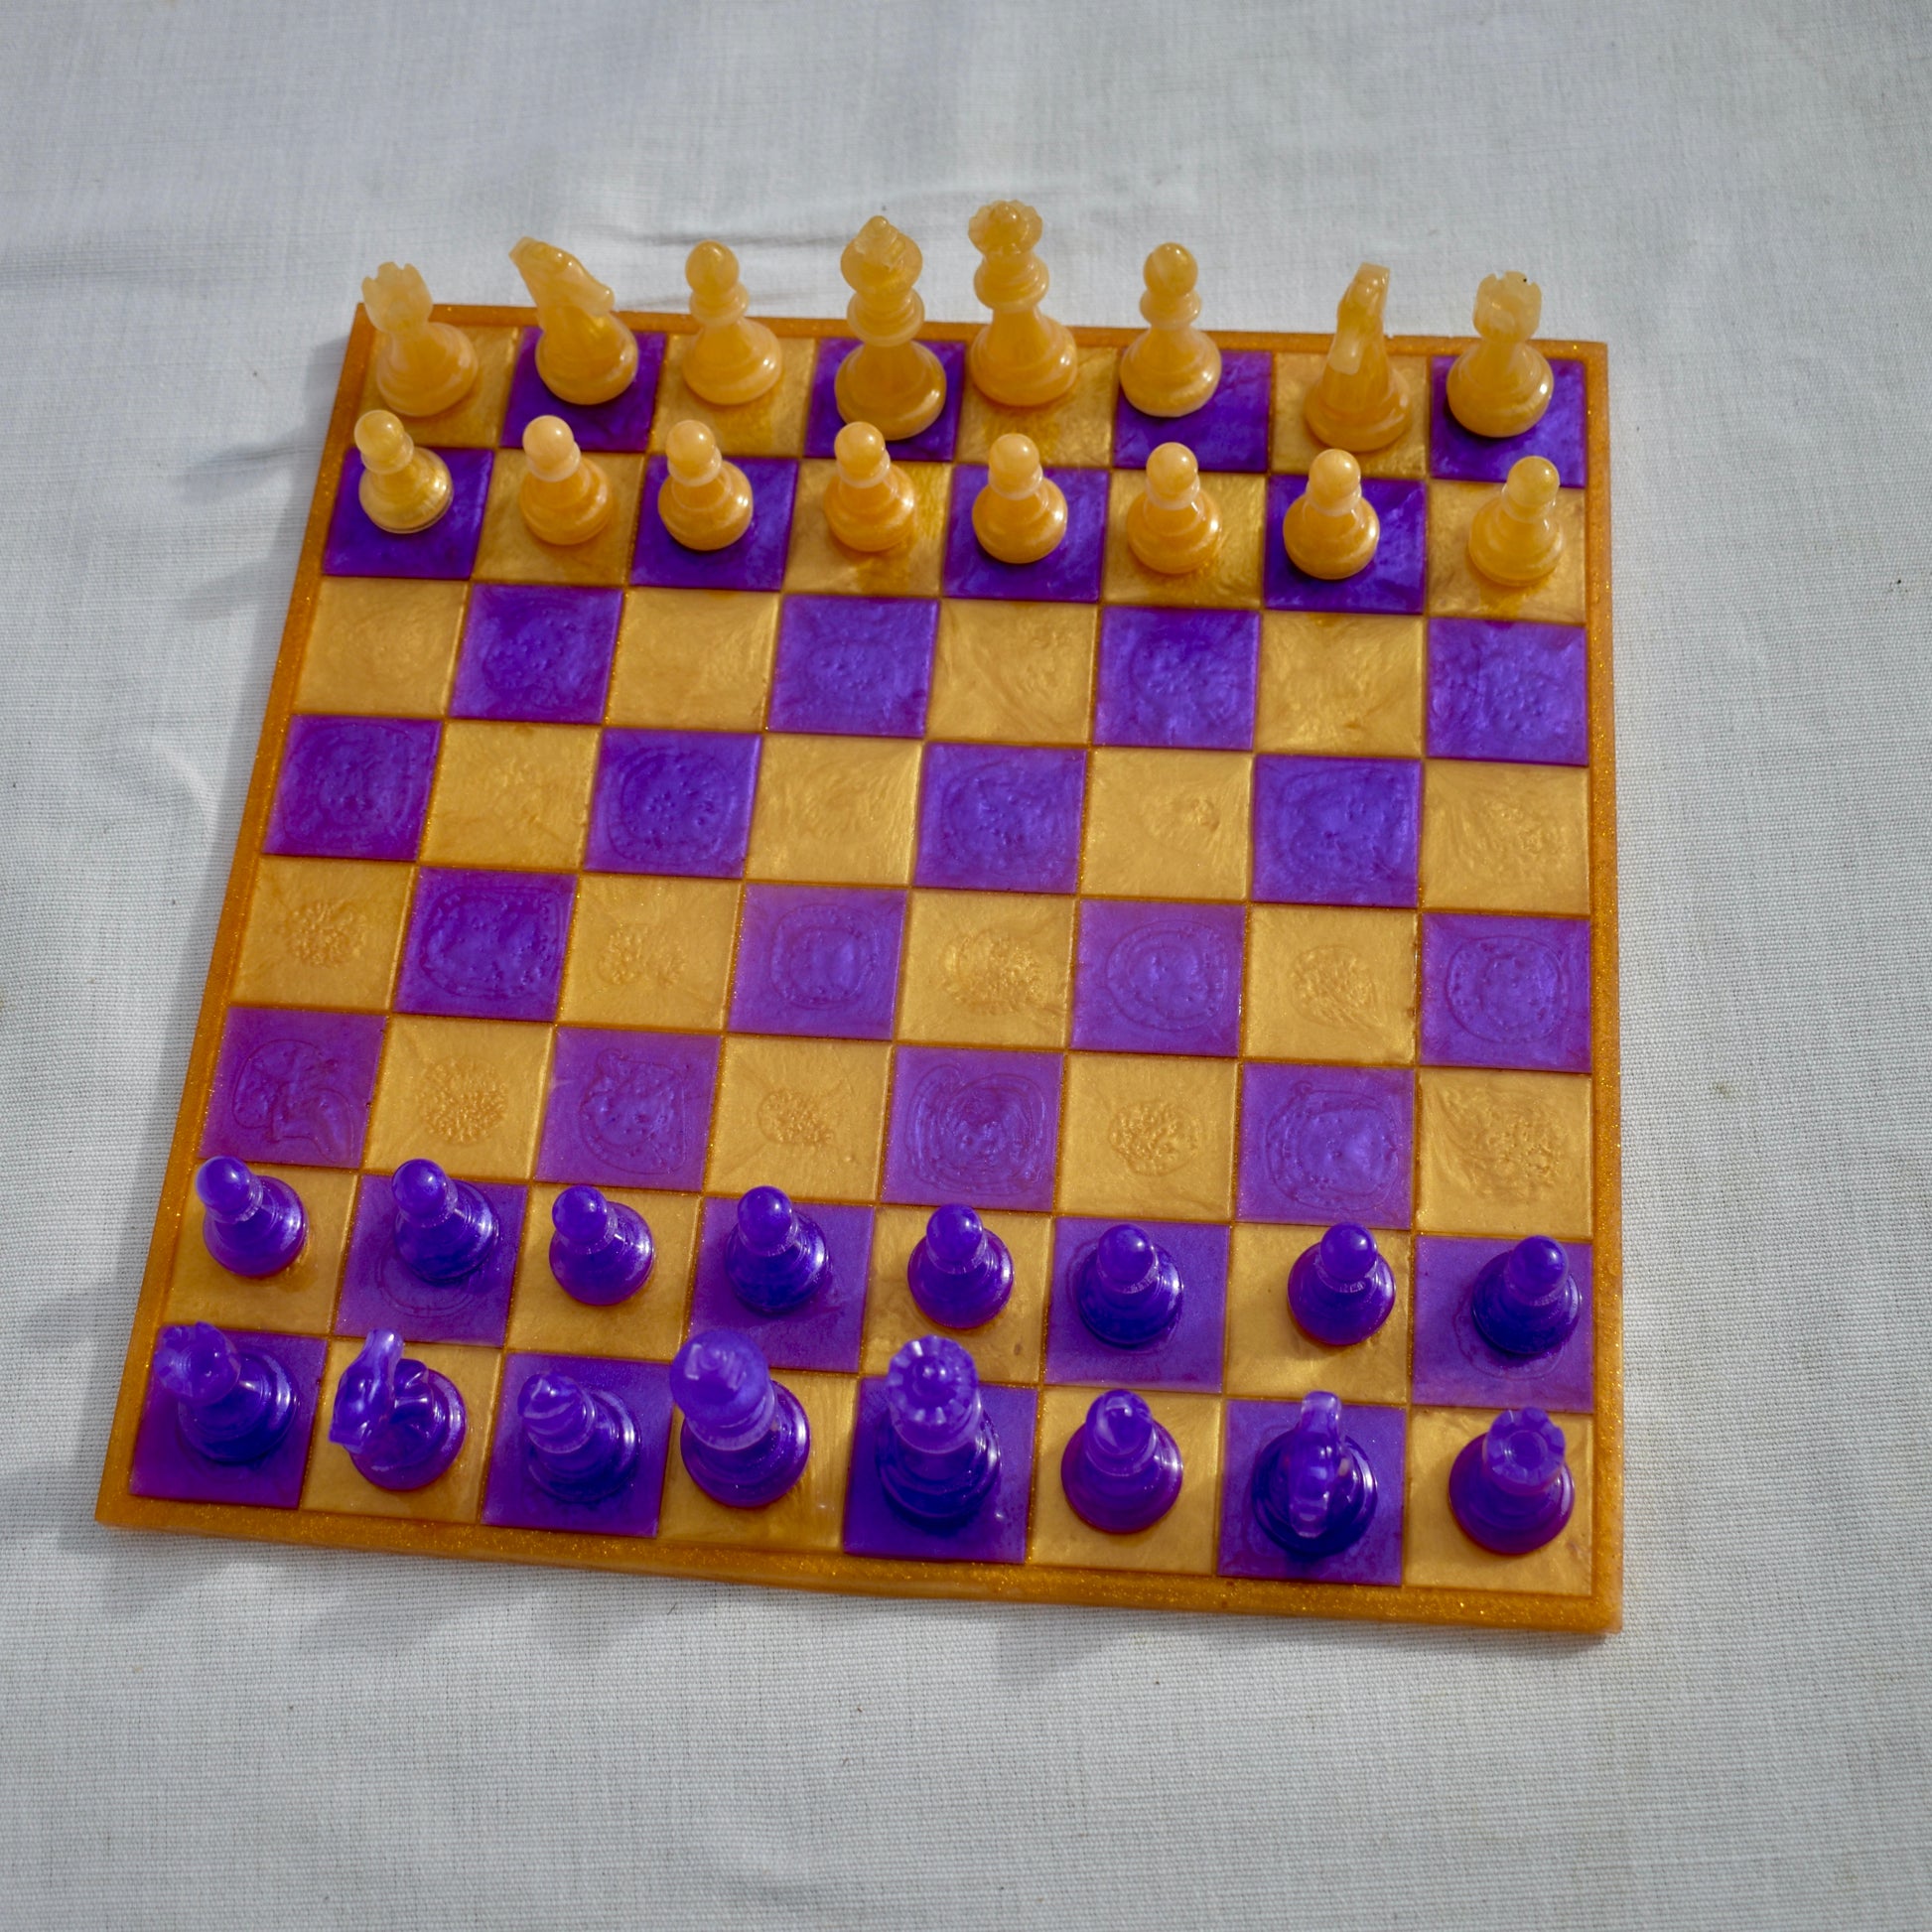 26 popular chess sets for people obsessed with Queen's Gambit